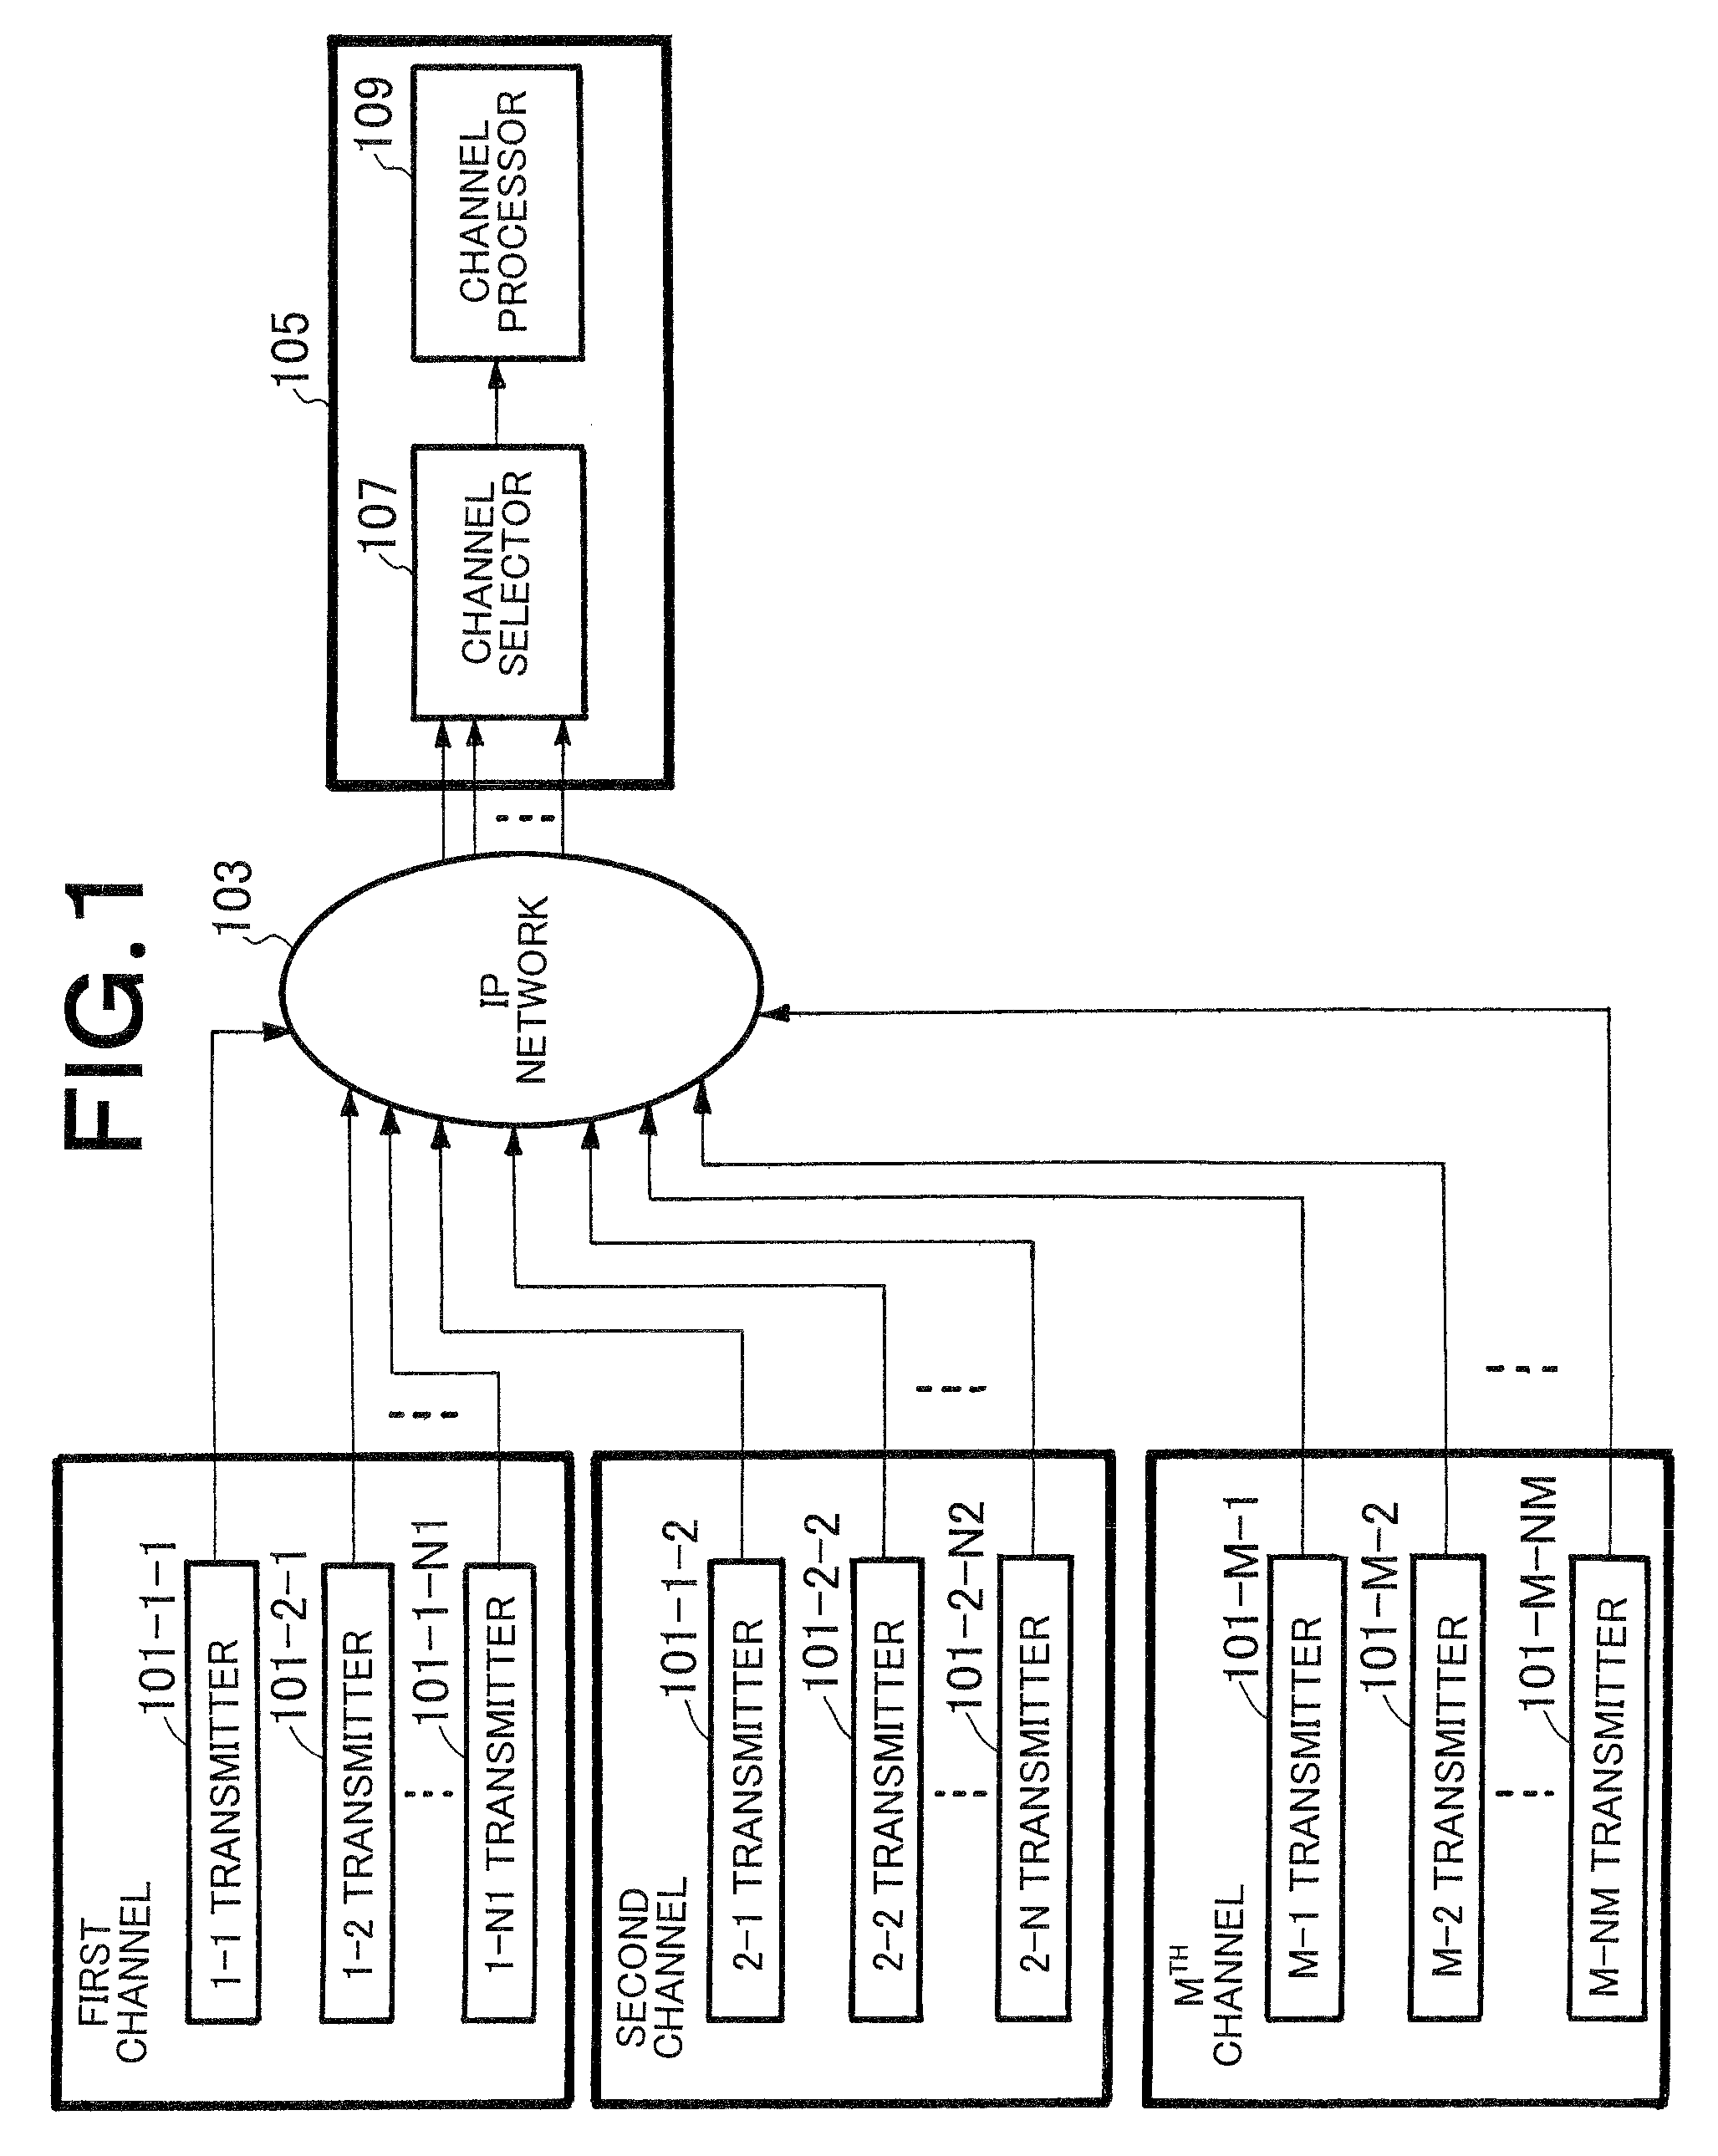 Received packet processing method and received packet processing apparatus for a packet having a sequence number and a time stamp